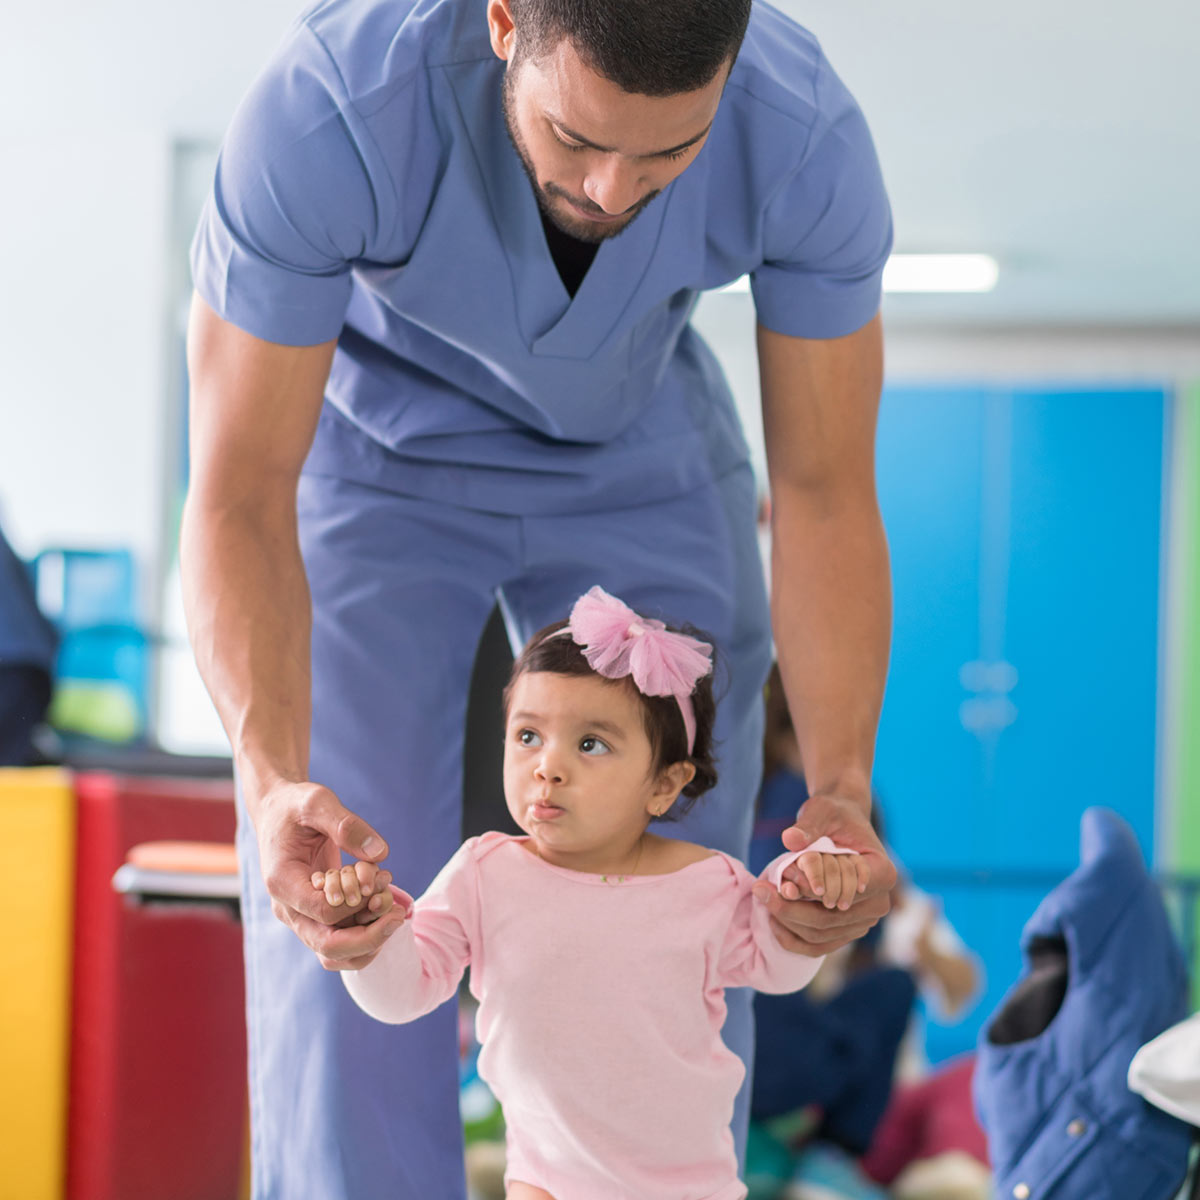 physical therapist helping little girl walk